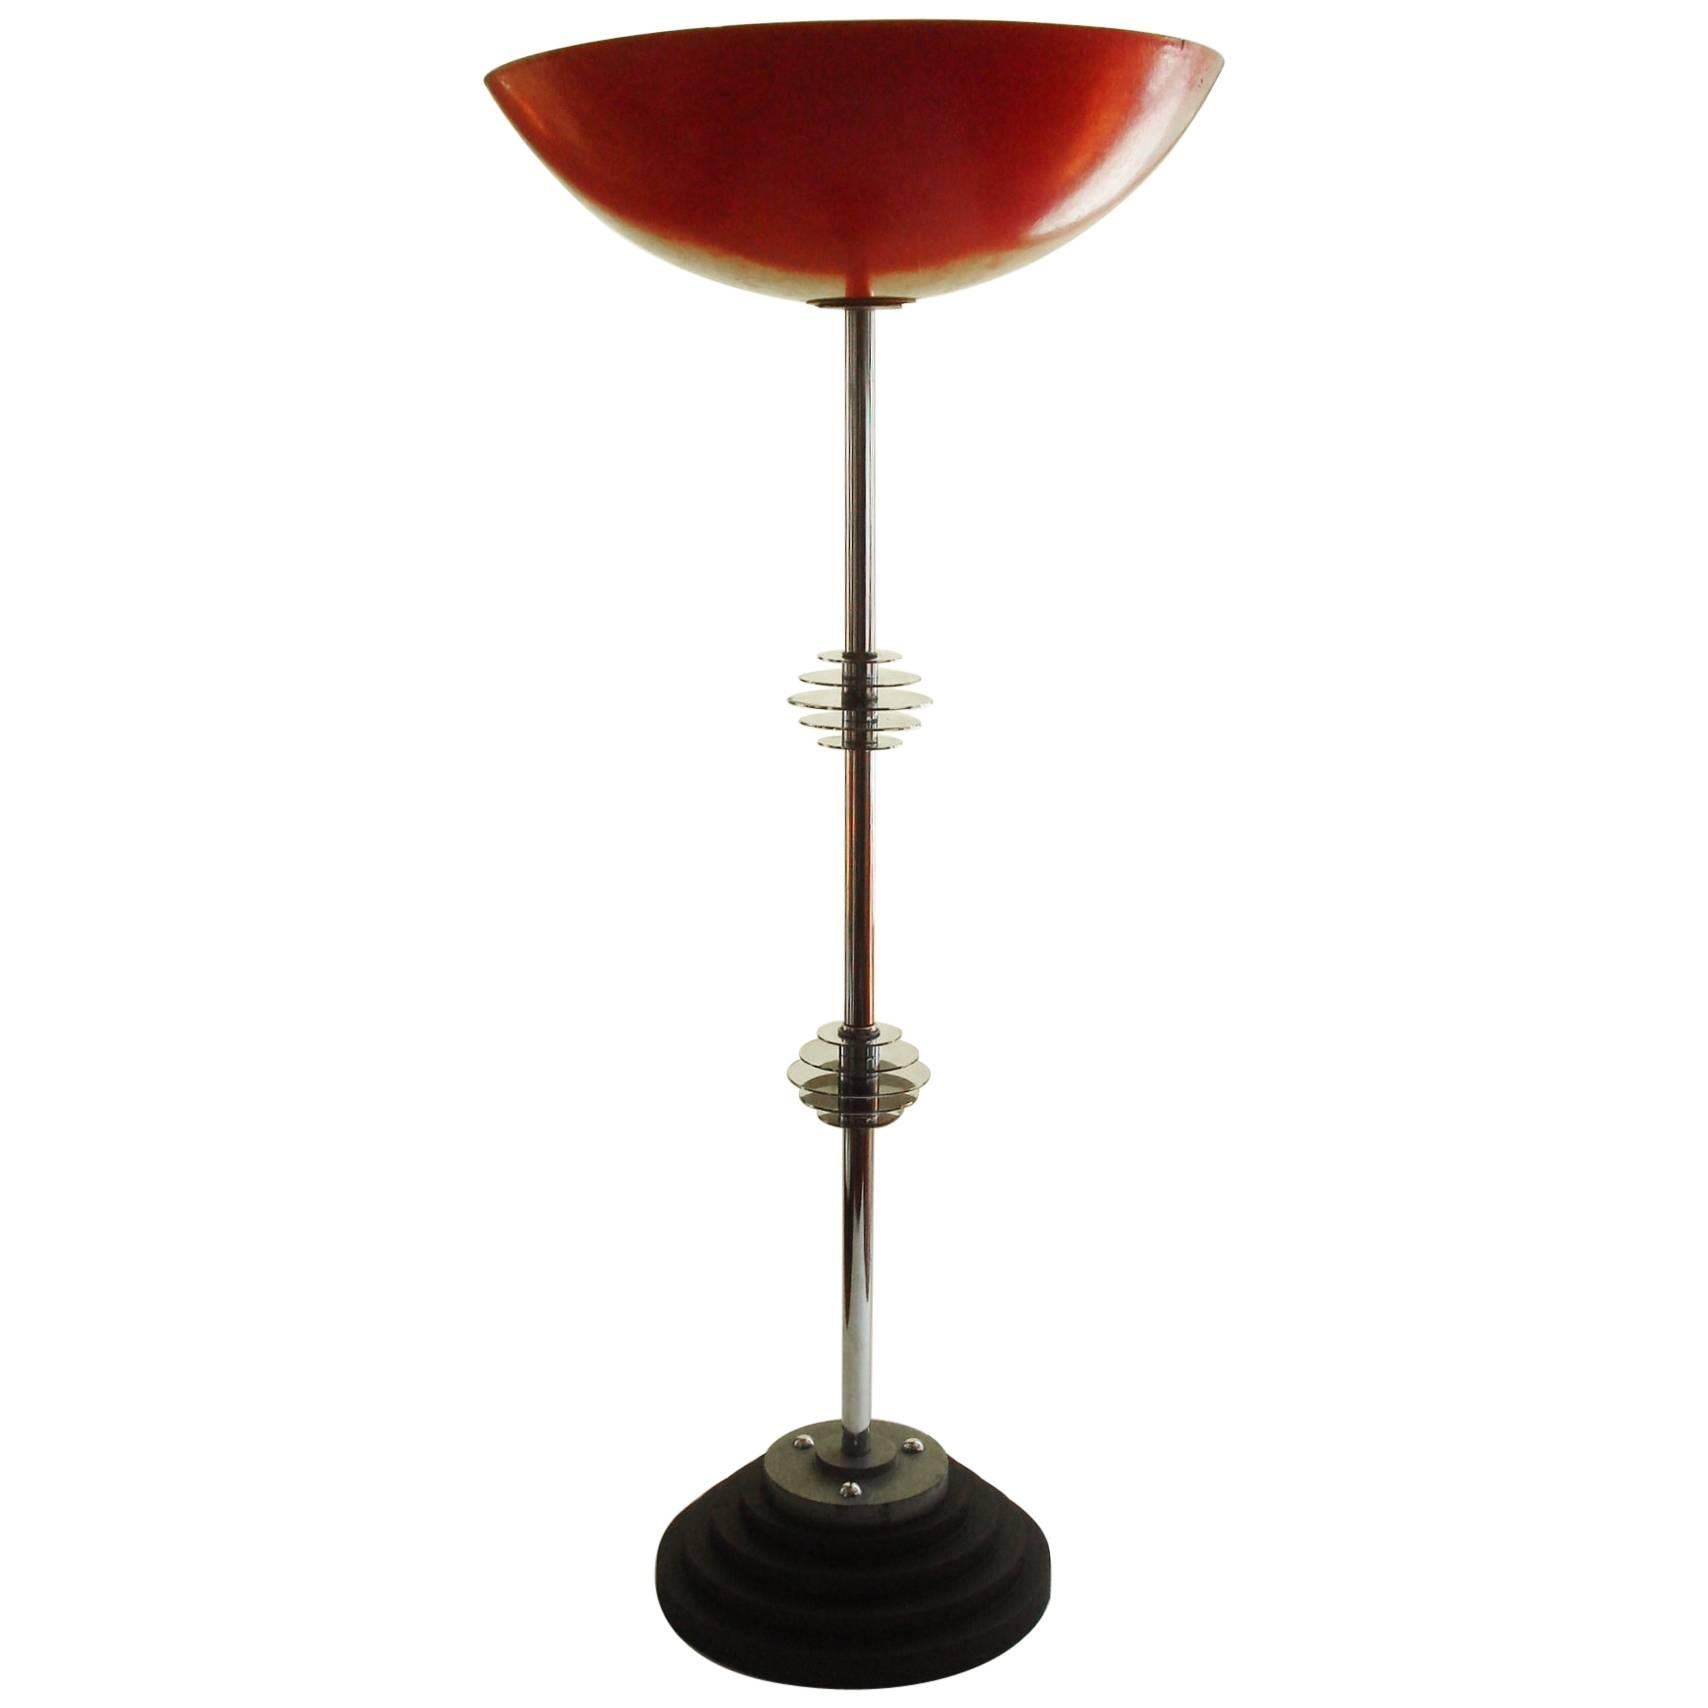 English Art Deco/Machine Age Chrome & Black Torchiere with Red Fiberglass Shade For Sale